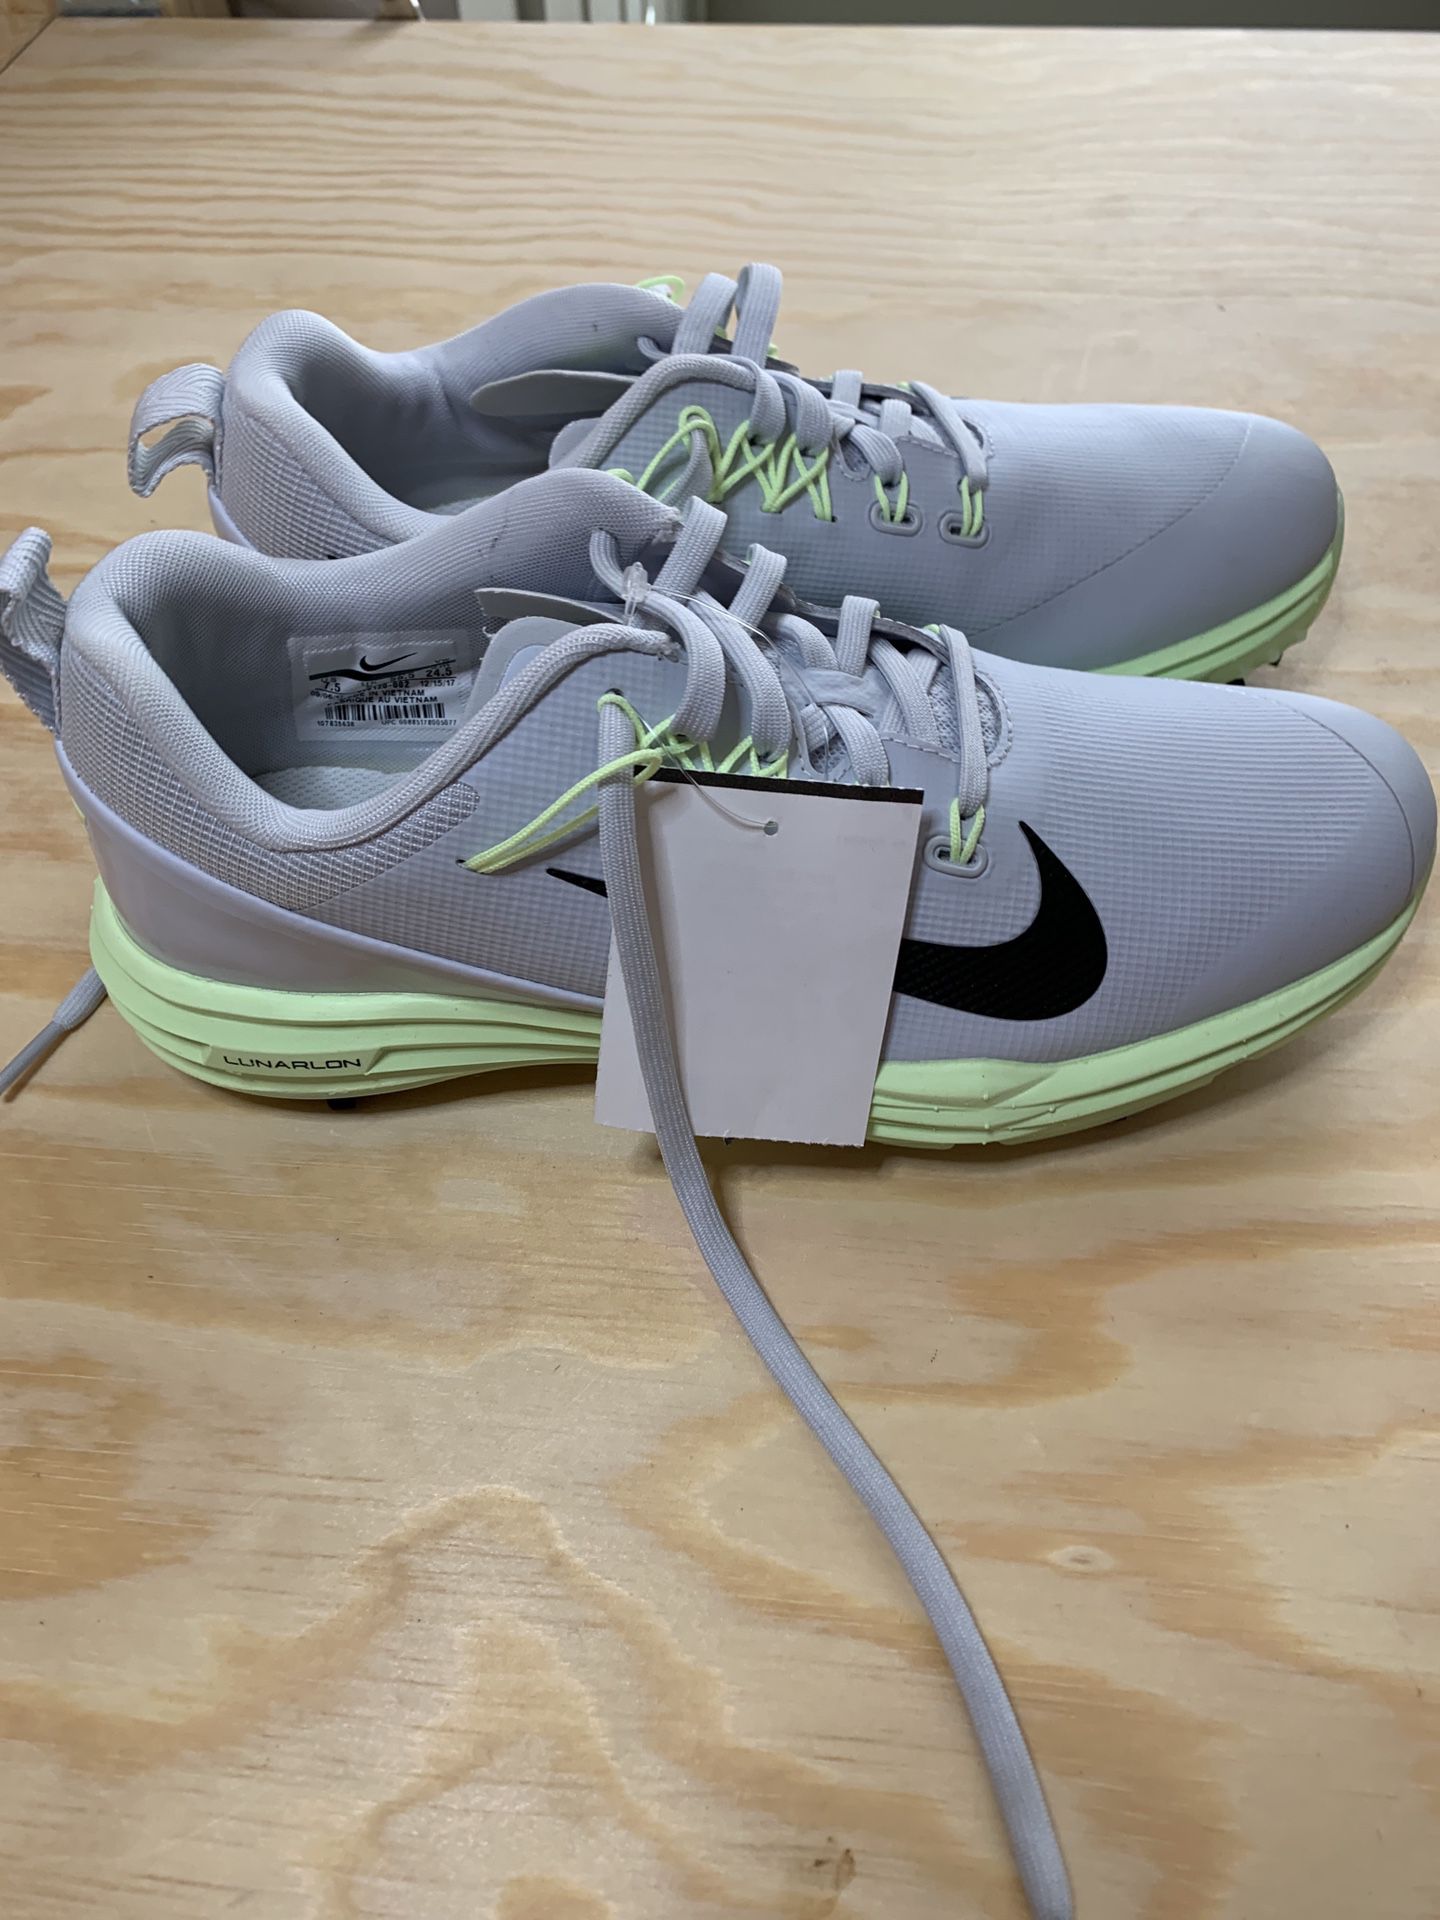 New Nike Lunar Command 2 Golf Shoes Womens Size 7 1/2 Grey Green